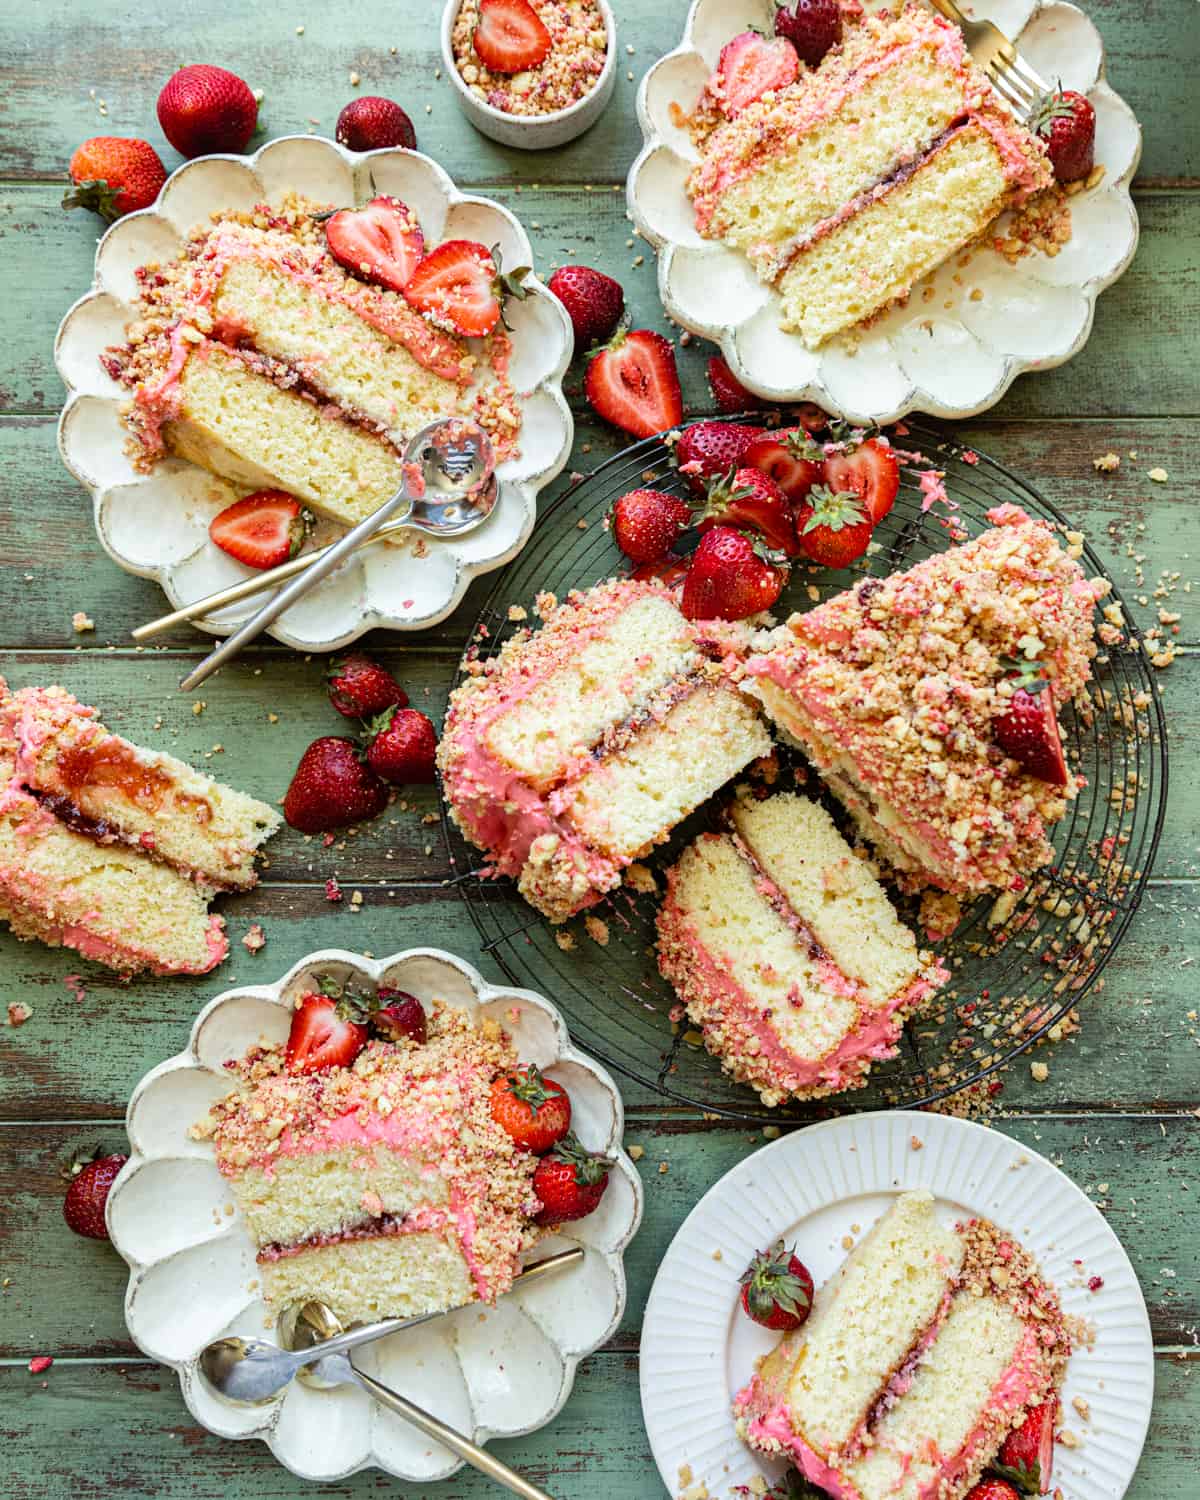 slices of strawberry crunch cake on a plate.